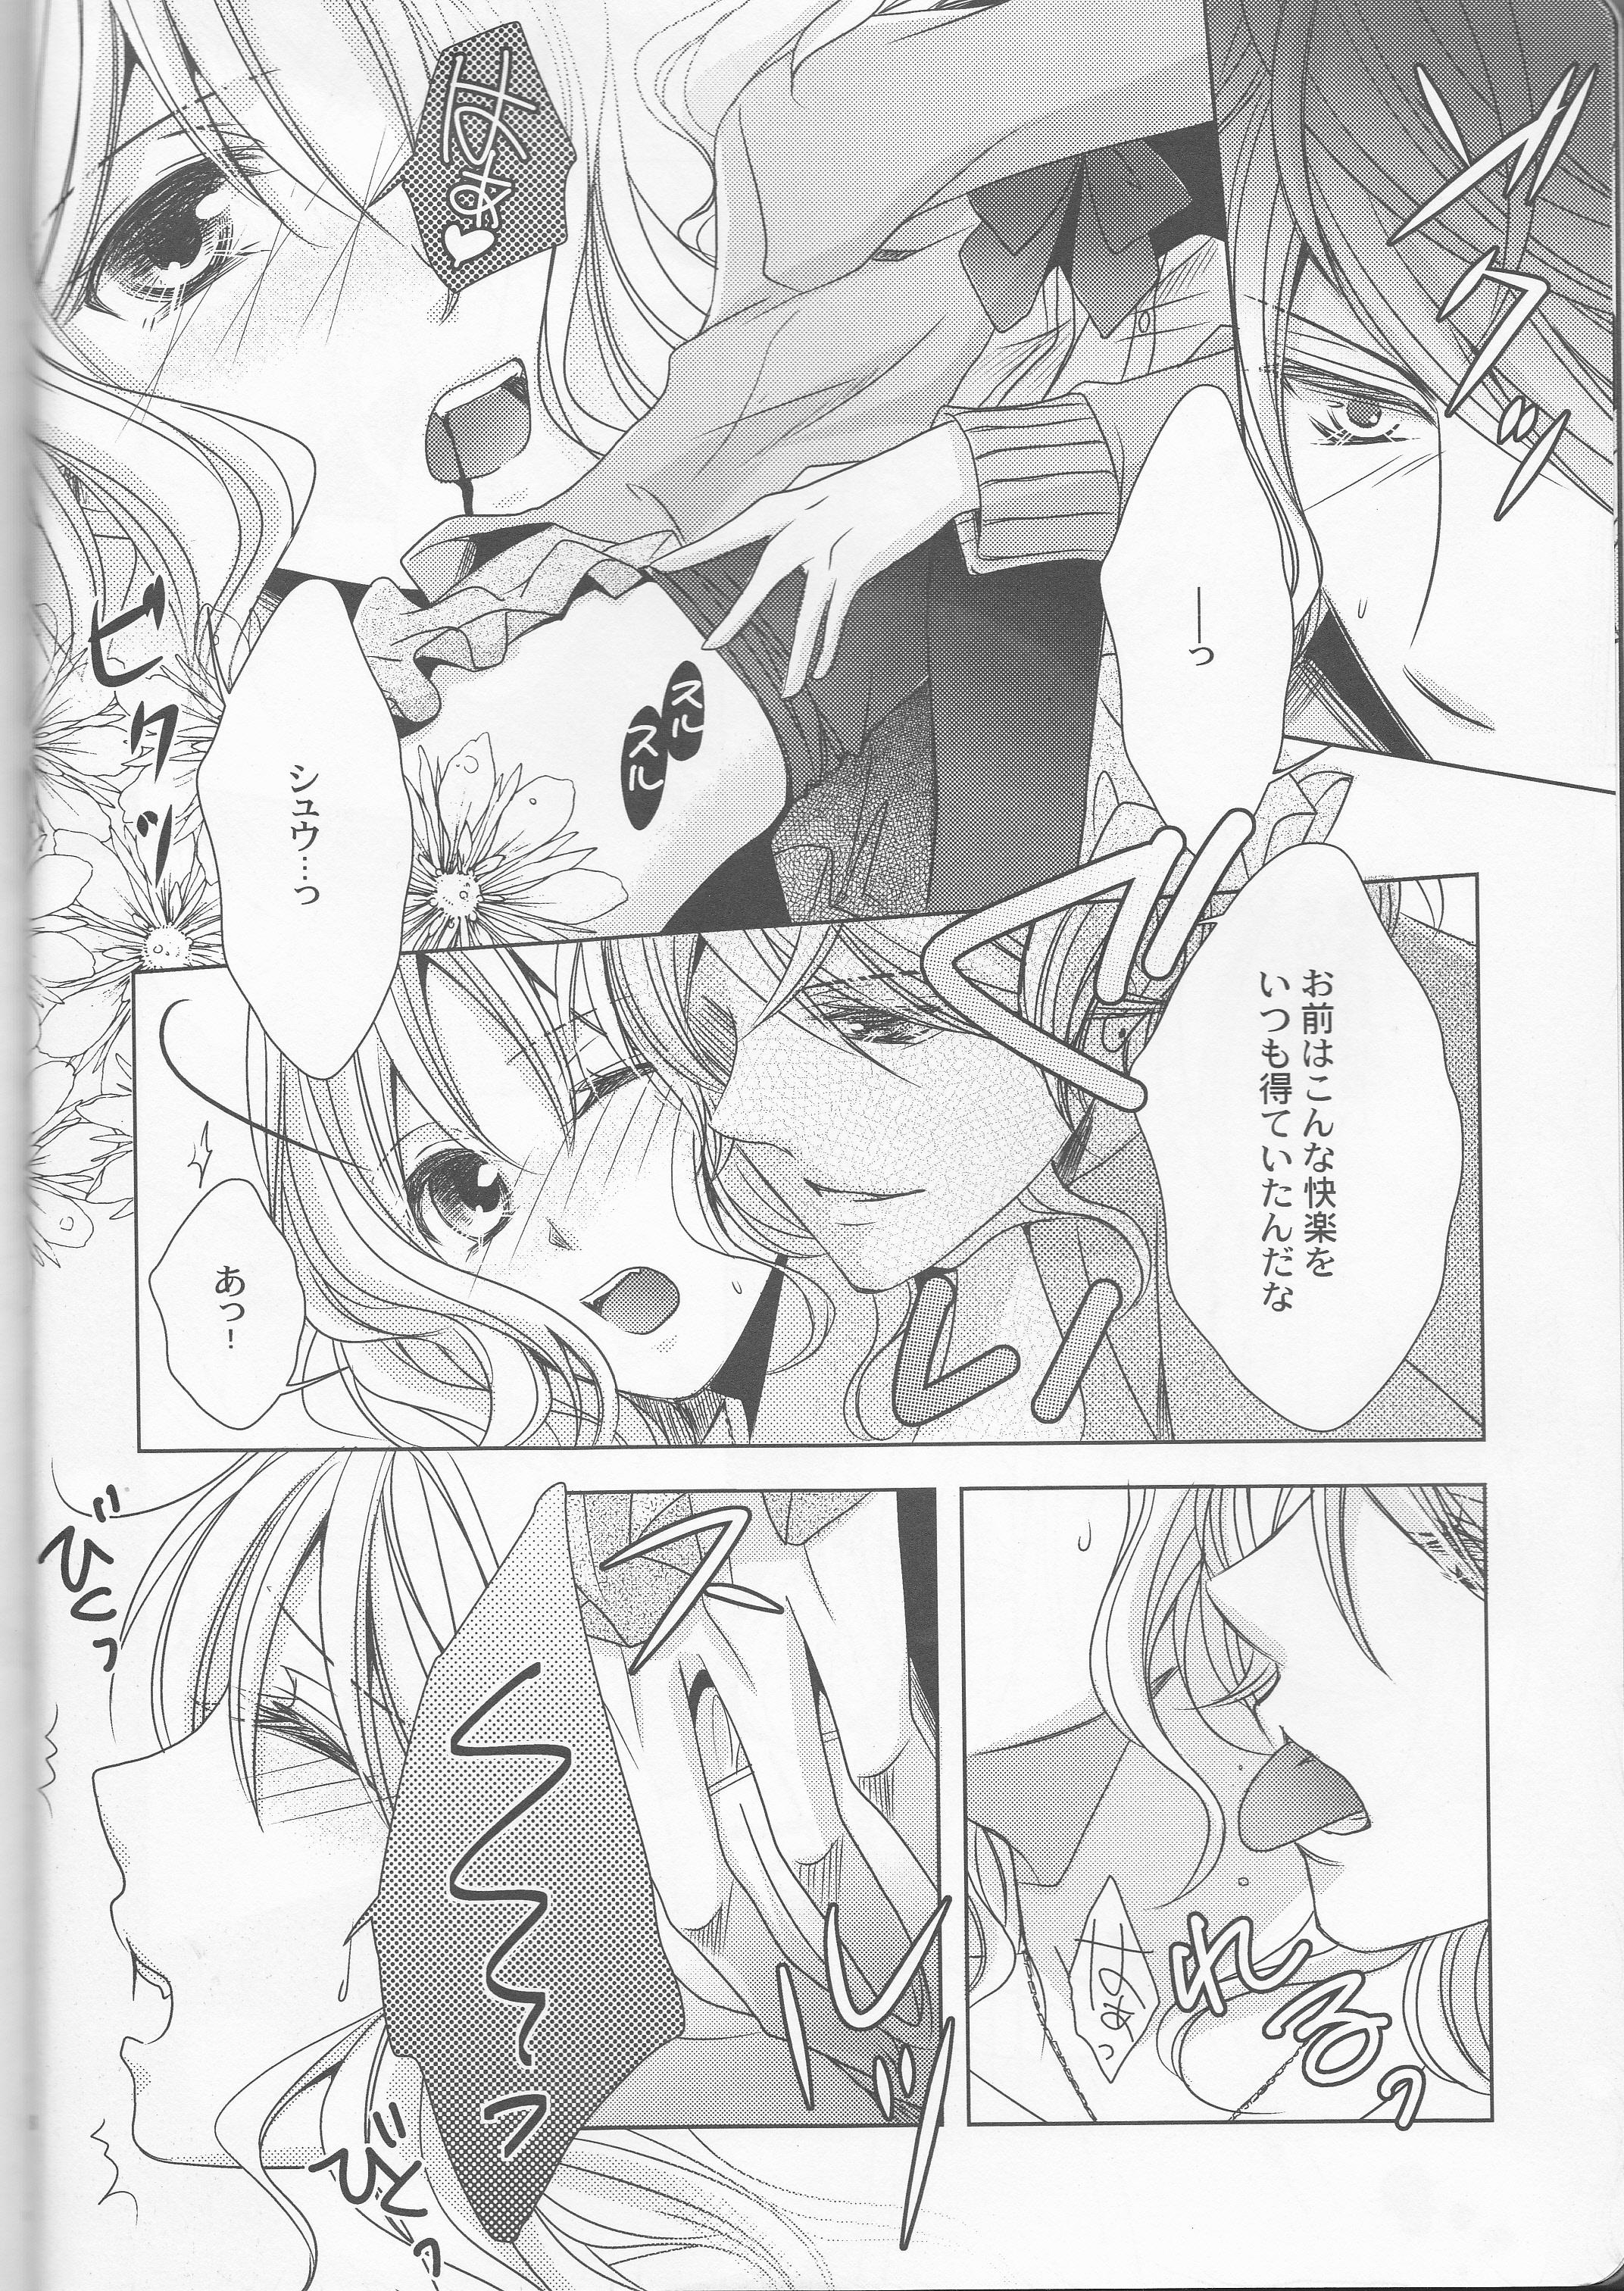 Nudity How to Blood - Diabolik lovers Putaria - Page 8